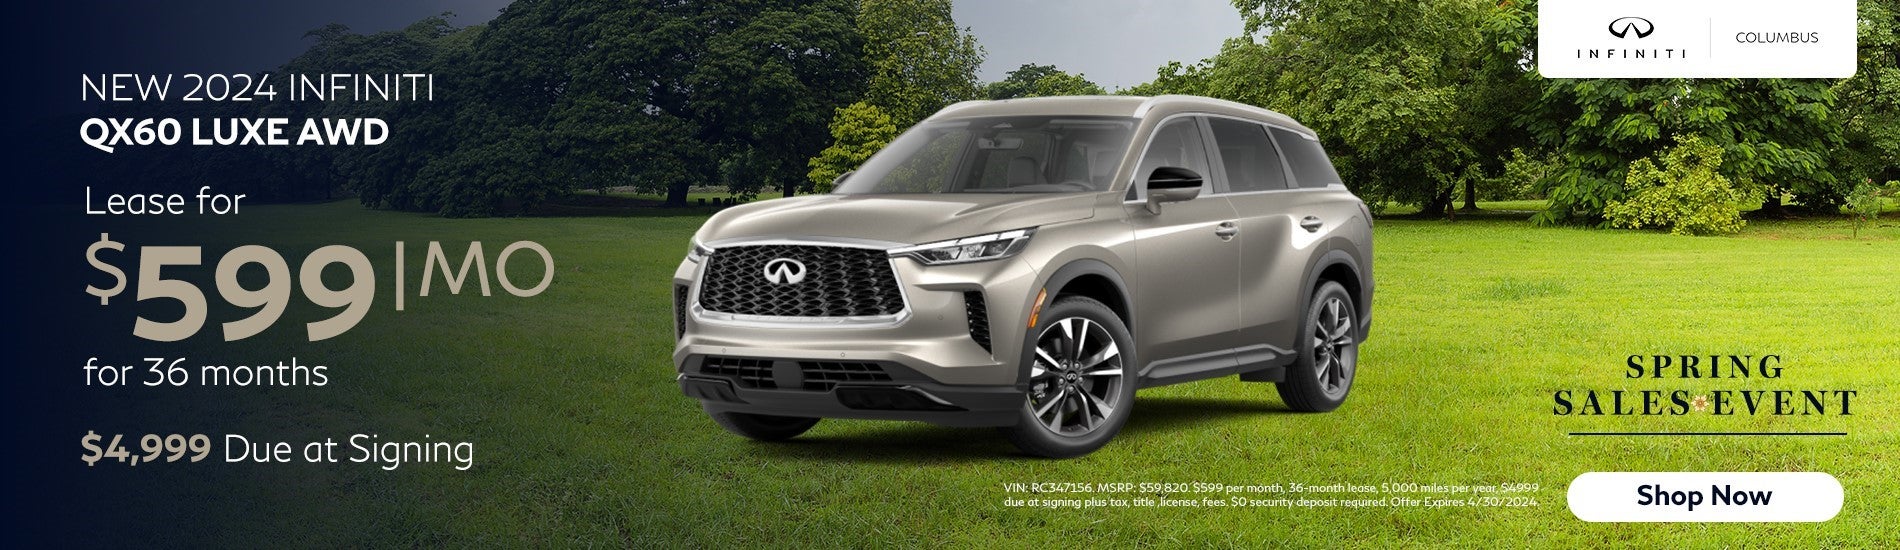 Lease Offer 2024 New QX60 Luxe AWD